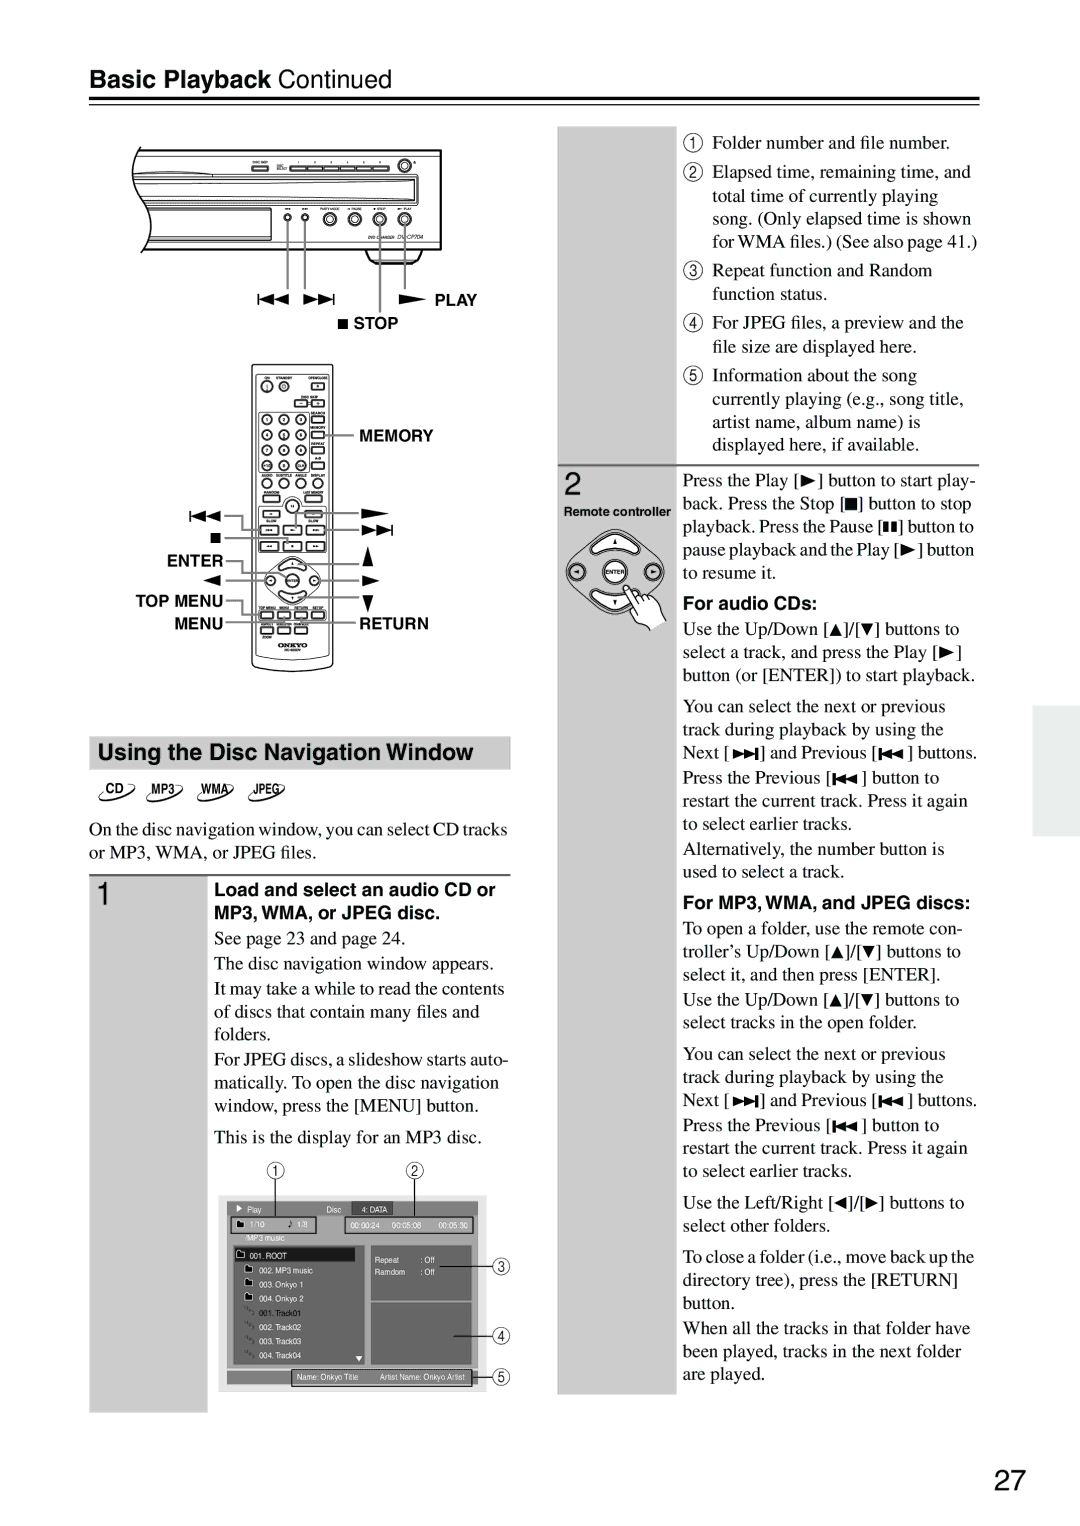 Onkyo DV-CP704S Using the Disc Navigation Window, Load and select an audio CD or, MP3, WMA, or Jpeg disc, For audio CDs 